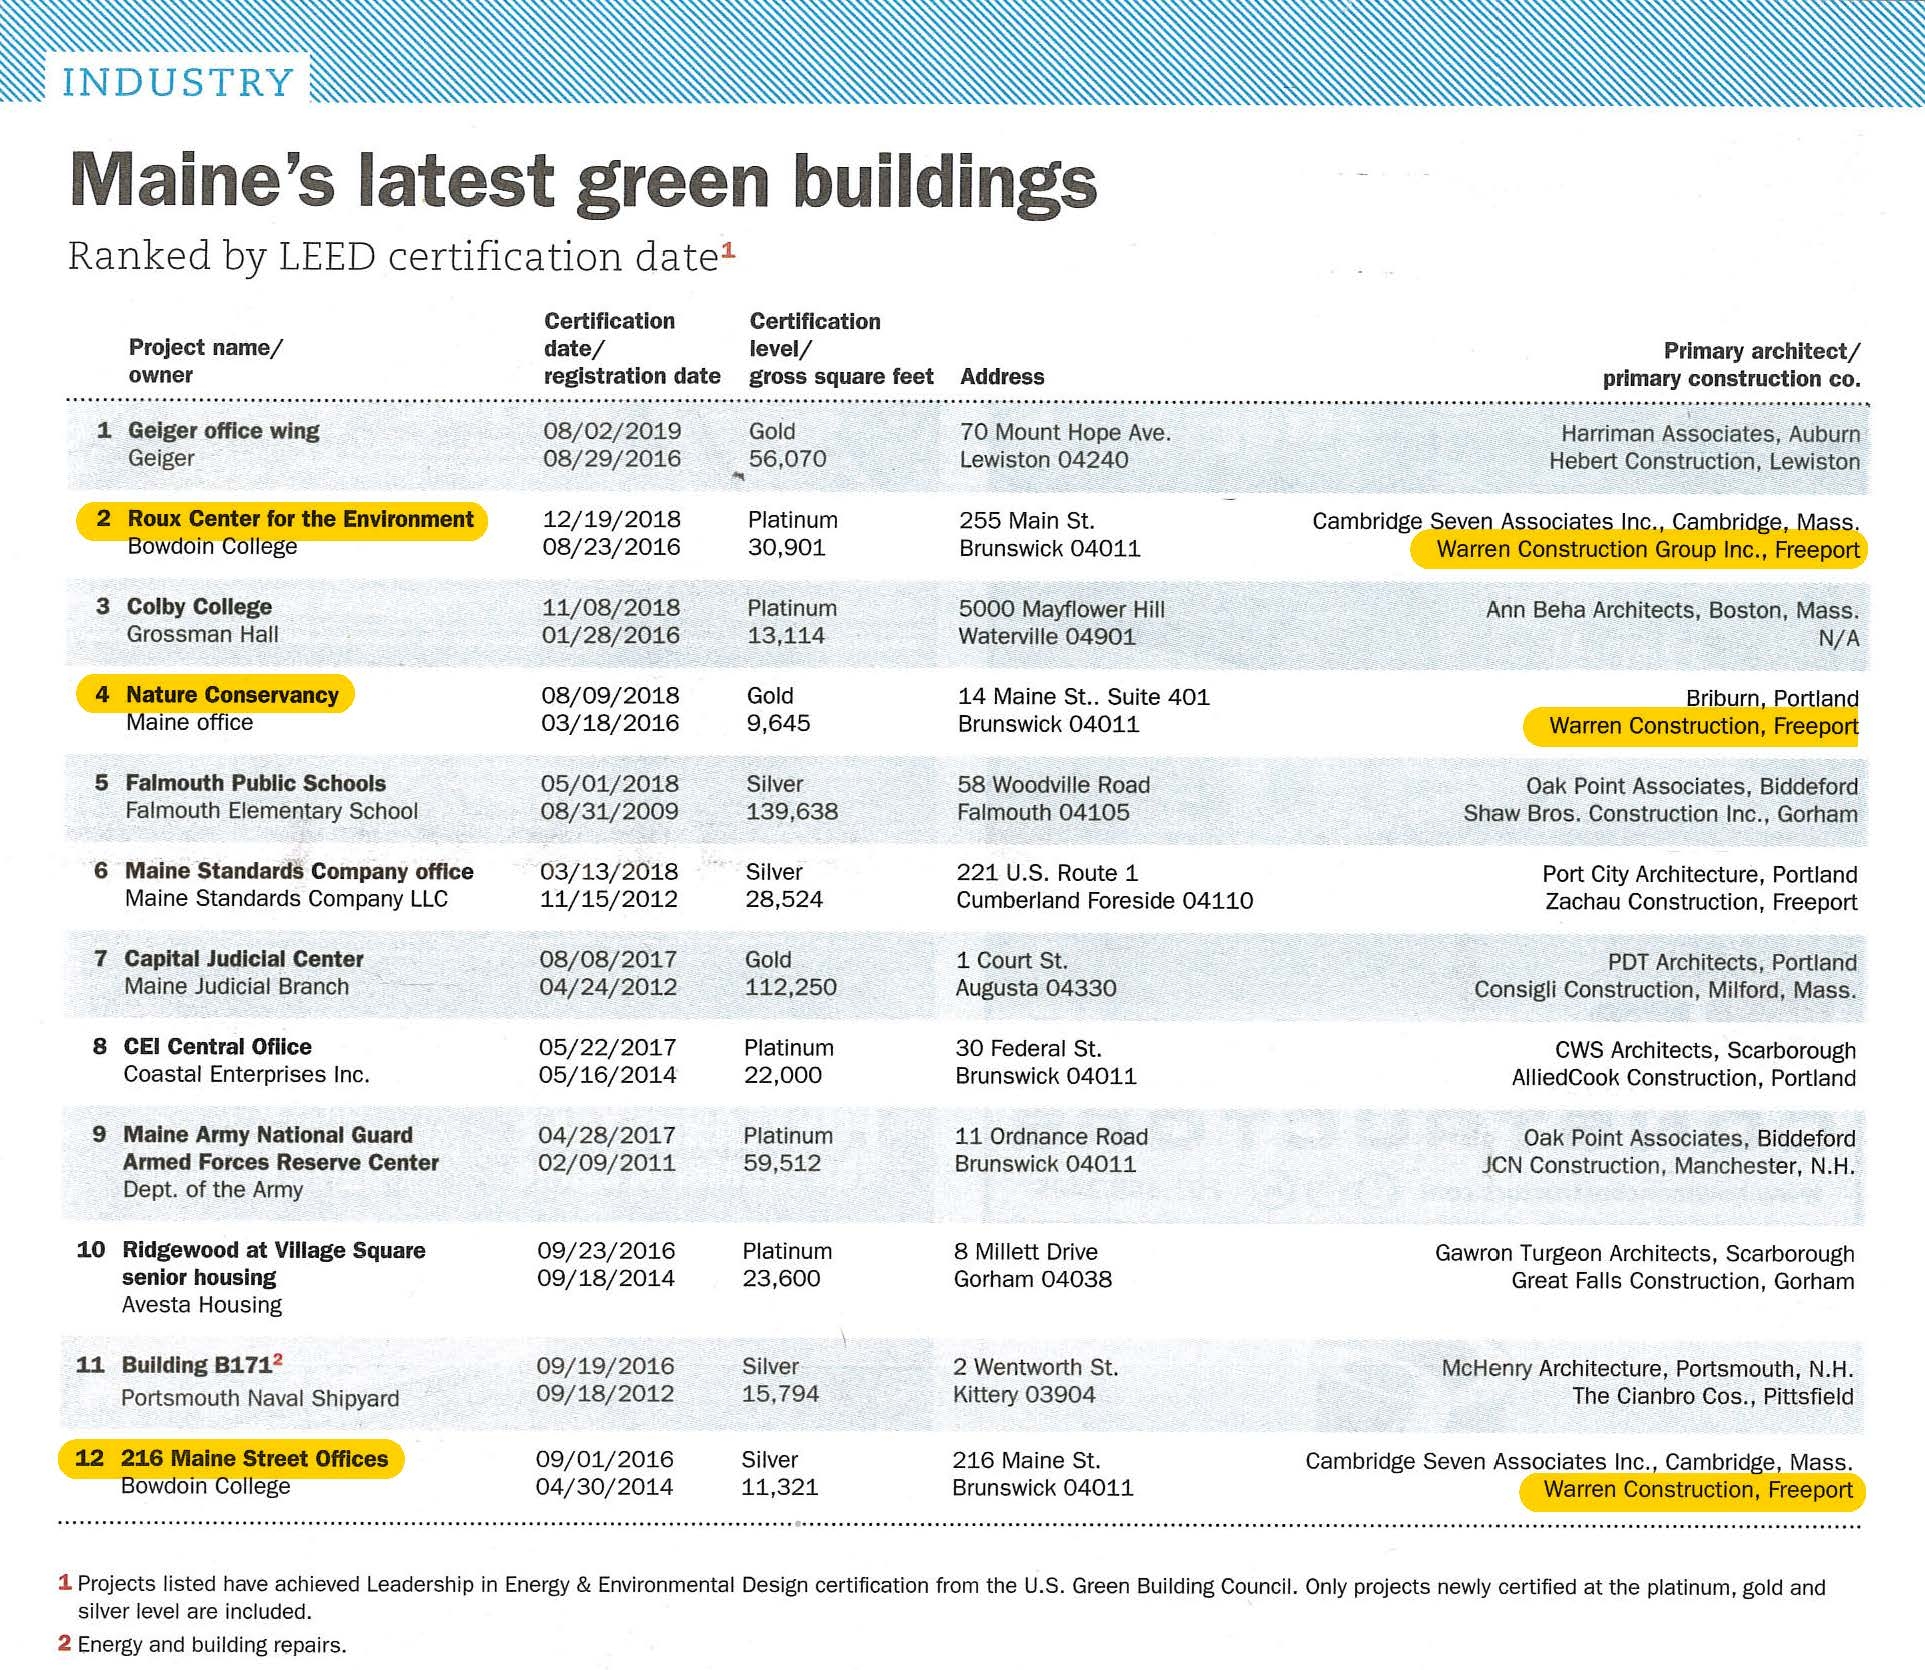 Maine's latest green buildings, LEED certified projects 